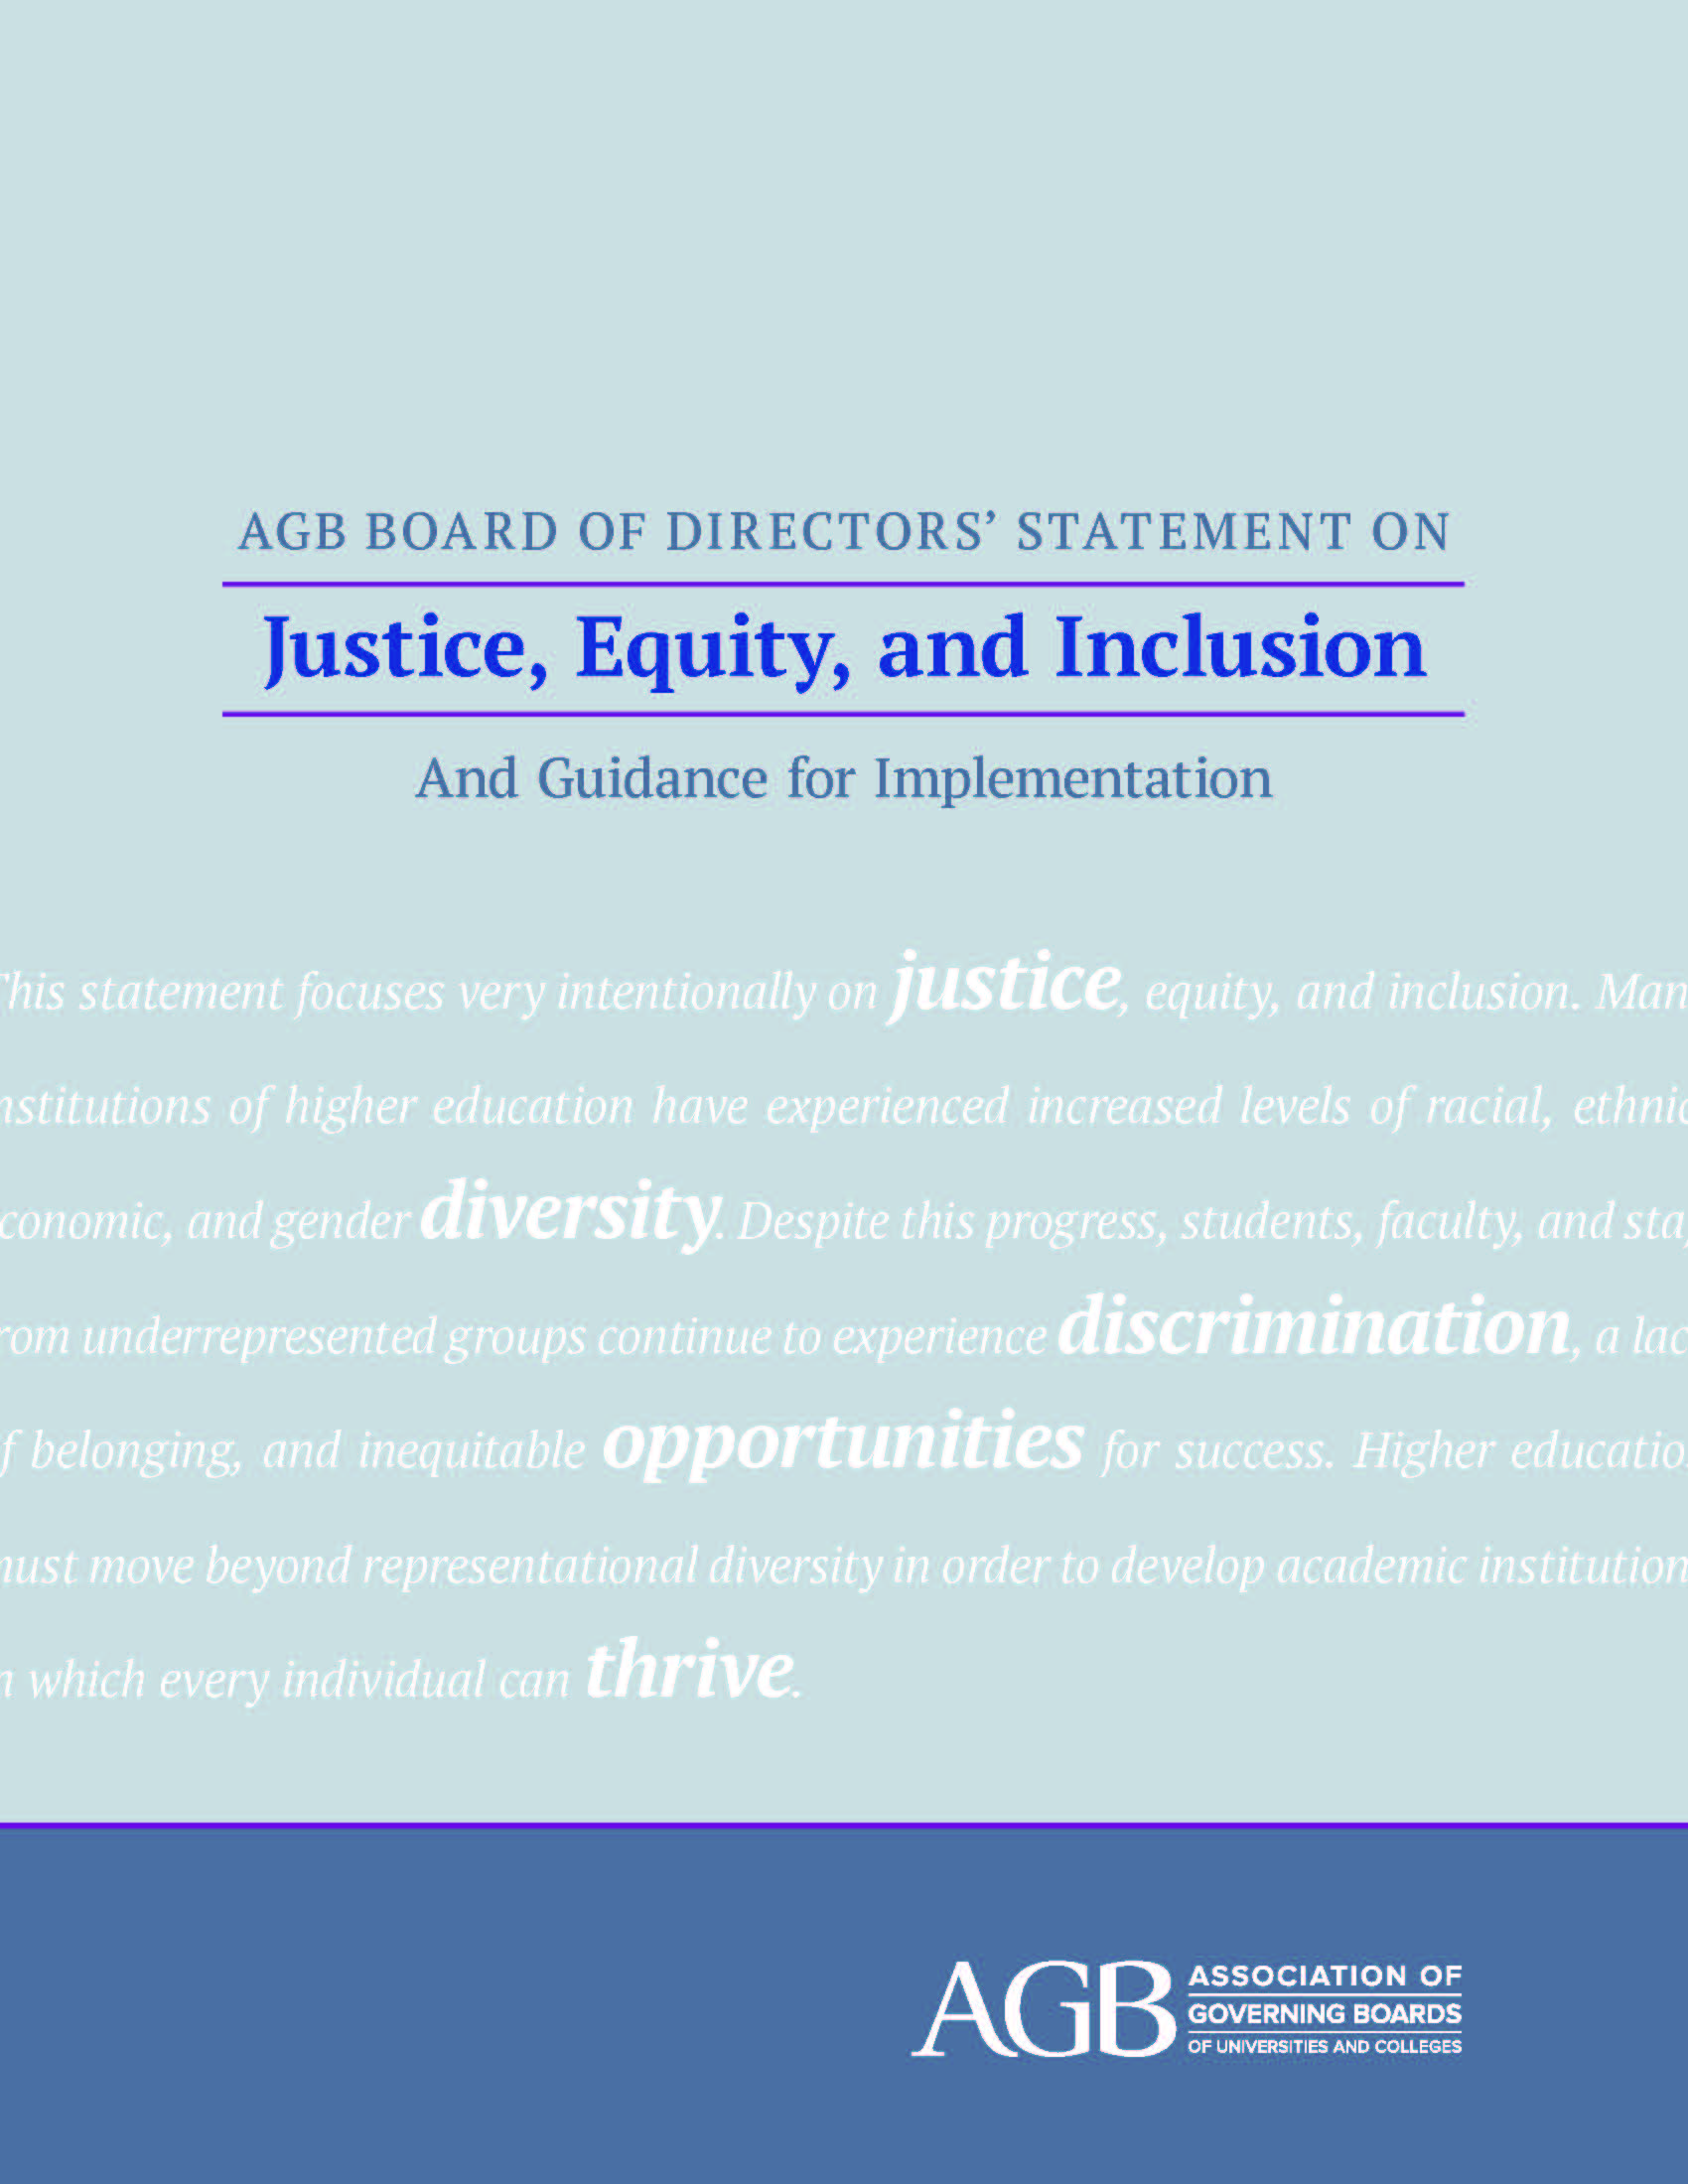 Statement on Justice, Equity, and Inclusion and Guidance for Implementation